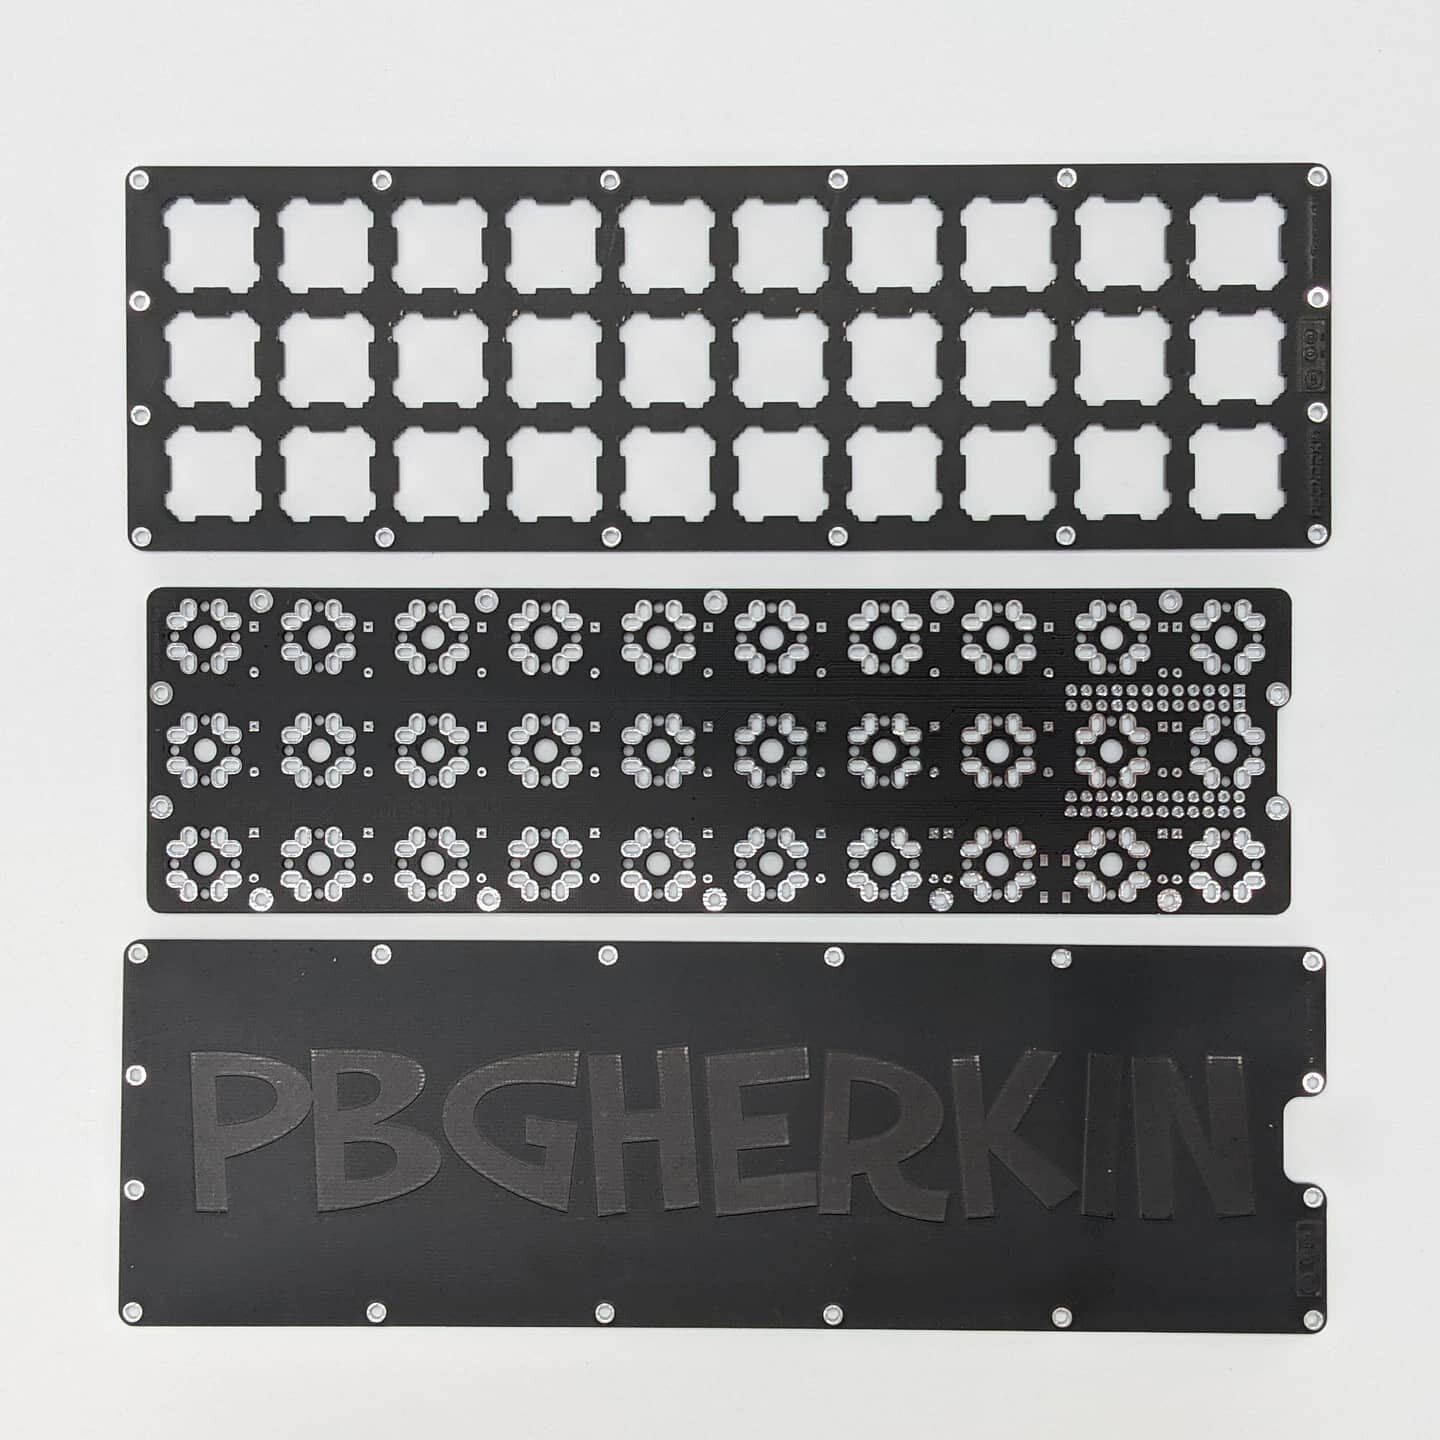 It's been a while since I've posted! I should have these up tomorrow! Some big news and changes this week

PB Gherkin by 40percent.club

#40percentkeyboard #40percentclub #gherkin #diykeyboard #diy #sudomod #geekhack #hackaday